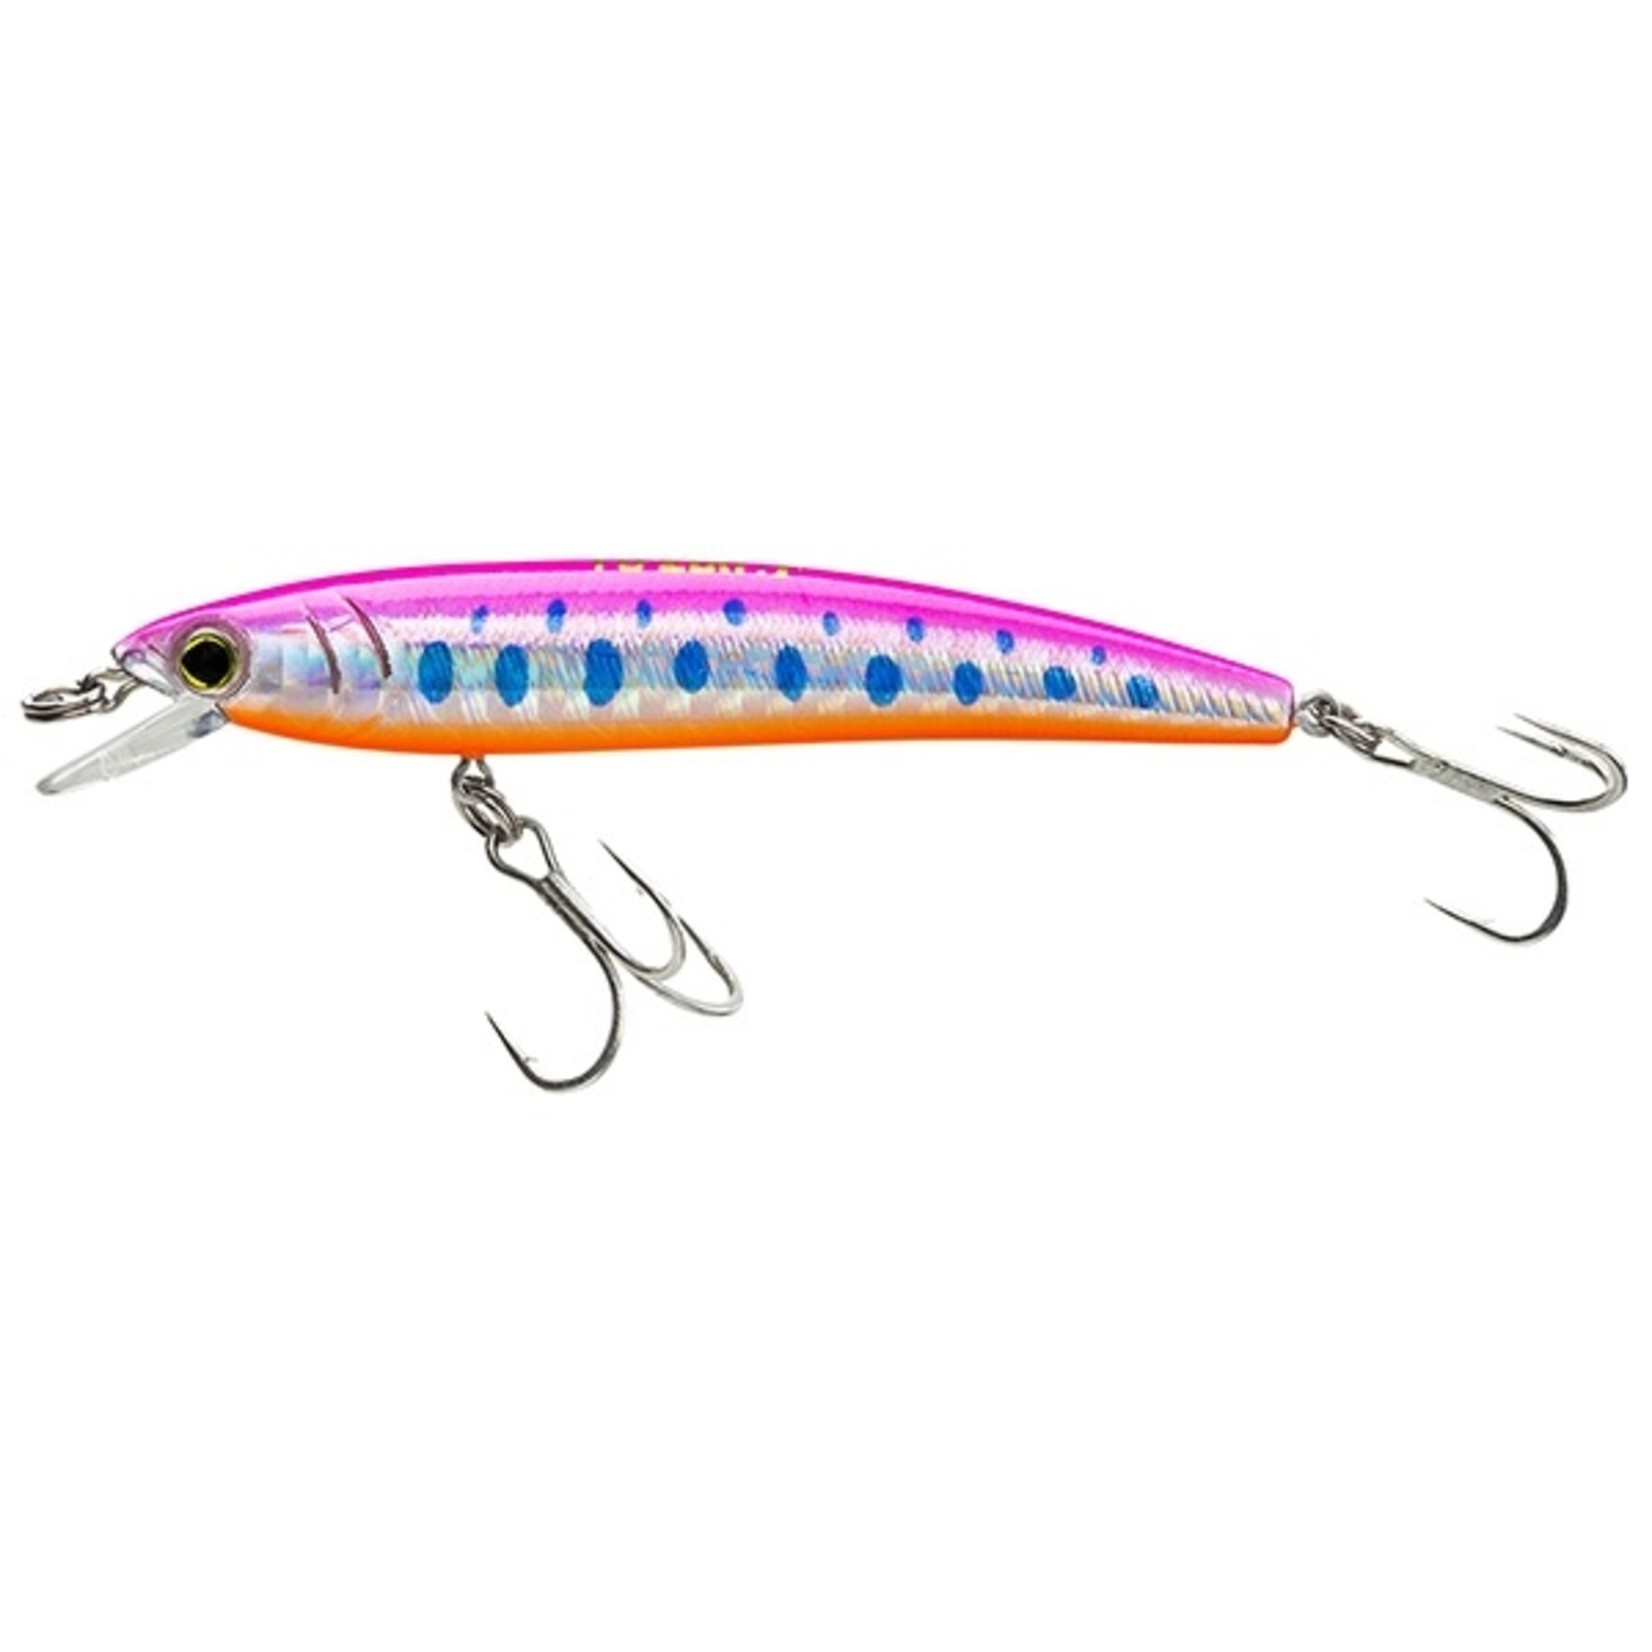 Pins Minnow, 2 3/4, 1/8 oz, Green Gold, Floating - Brothers Outdoors LLC